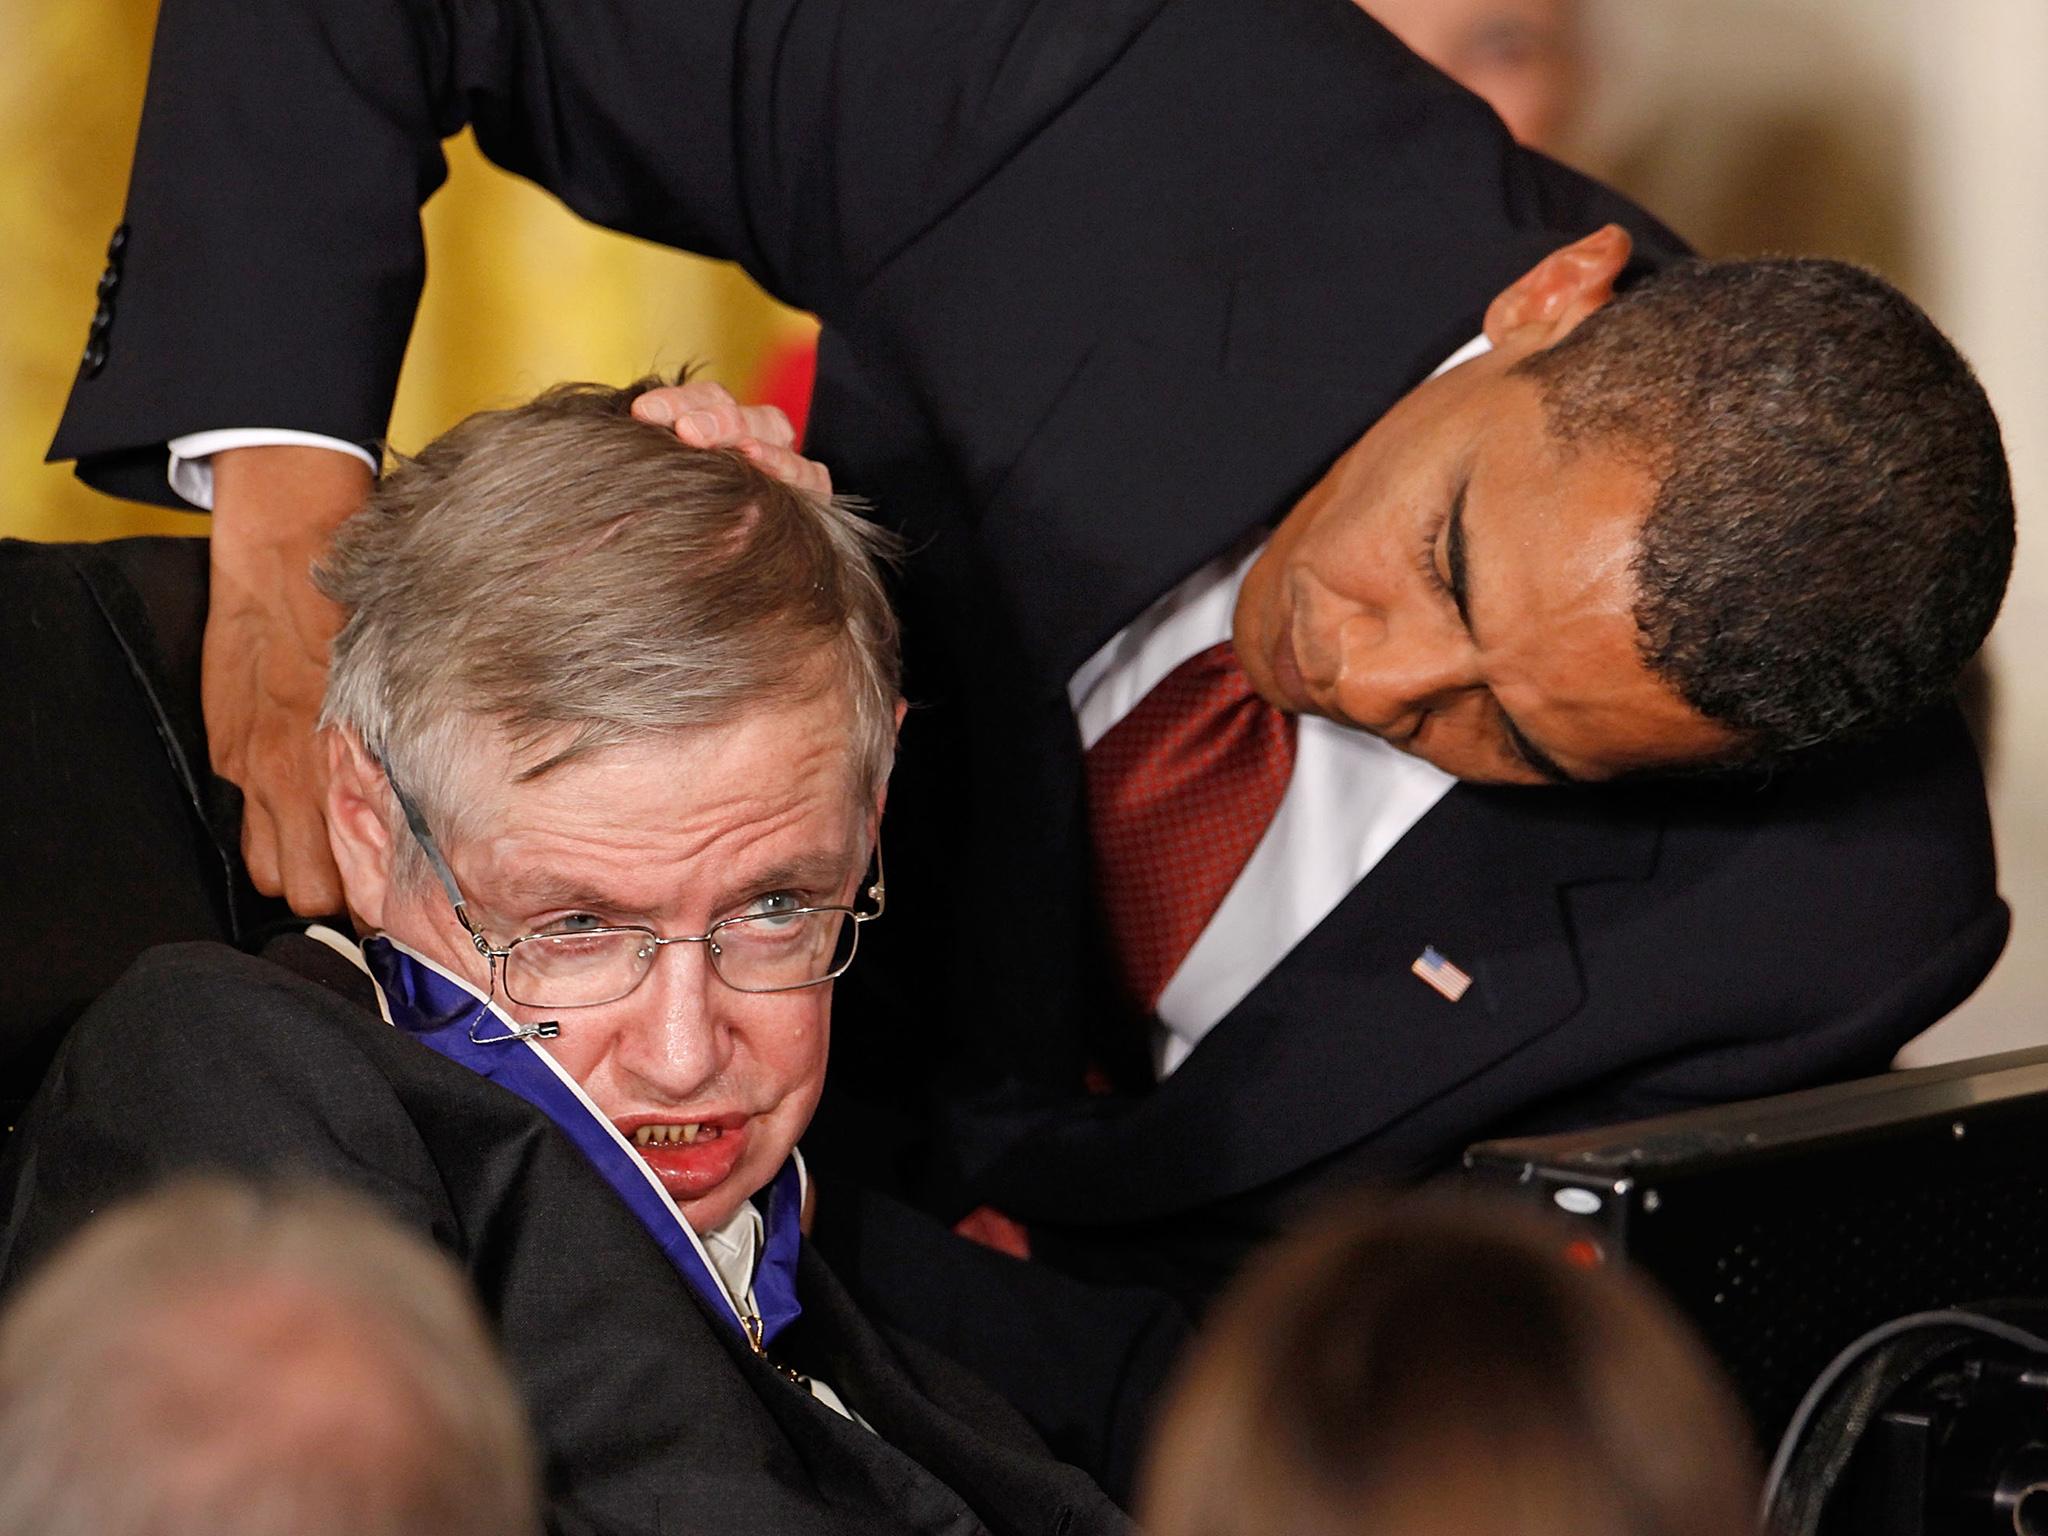 Hawking receiving the Presidential Medal of Freedom from former US President Barack Obama